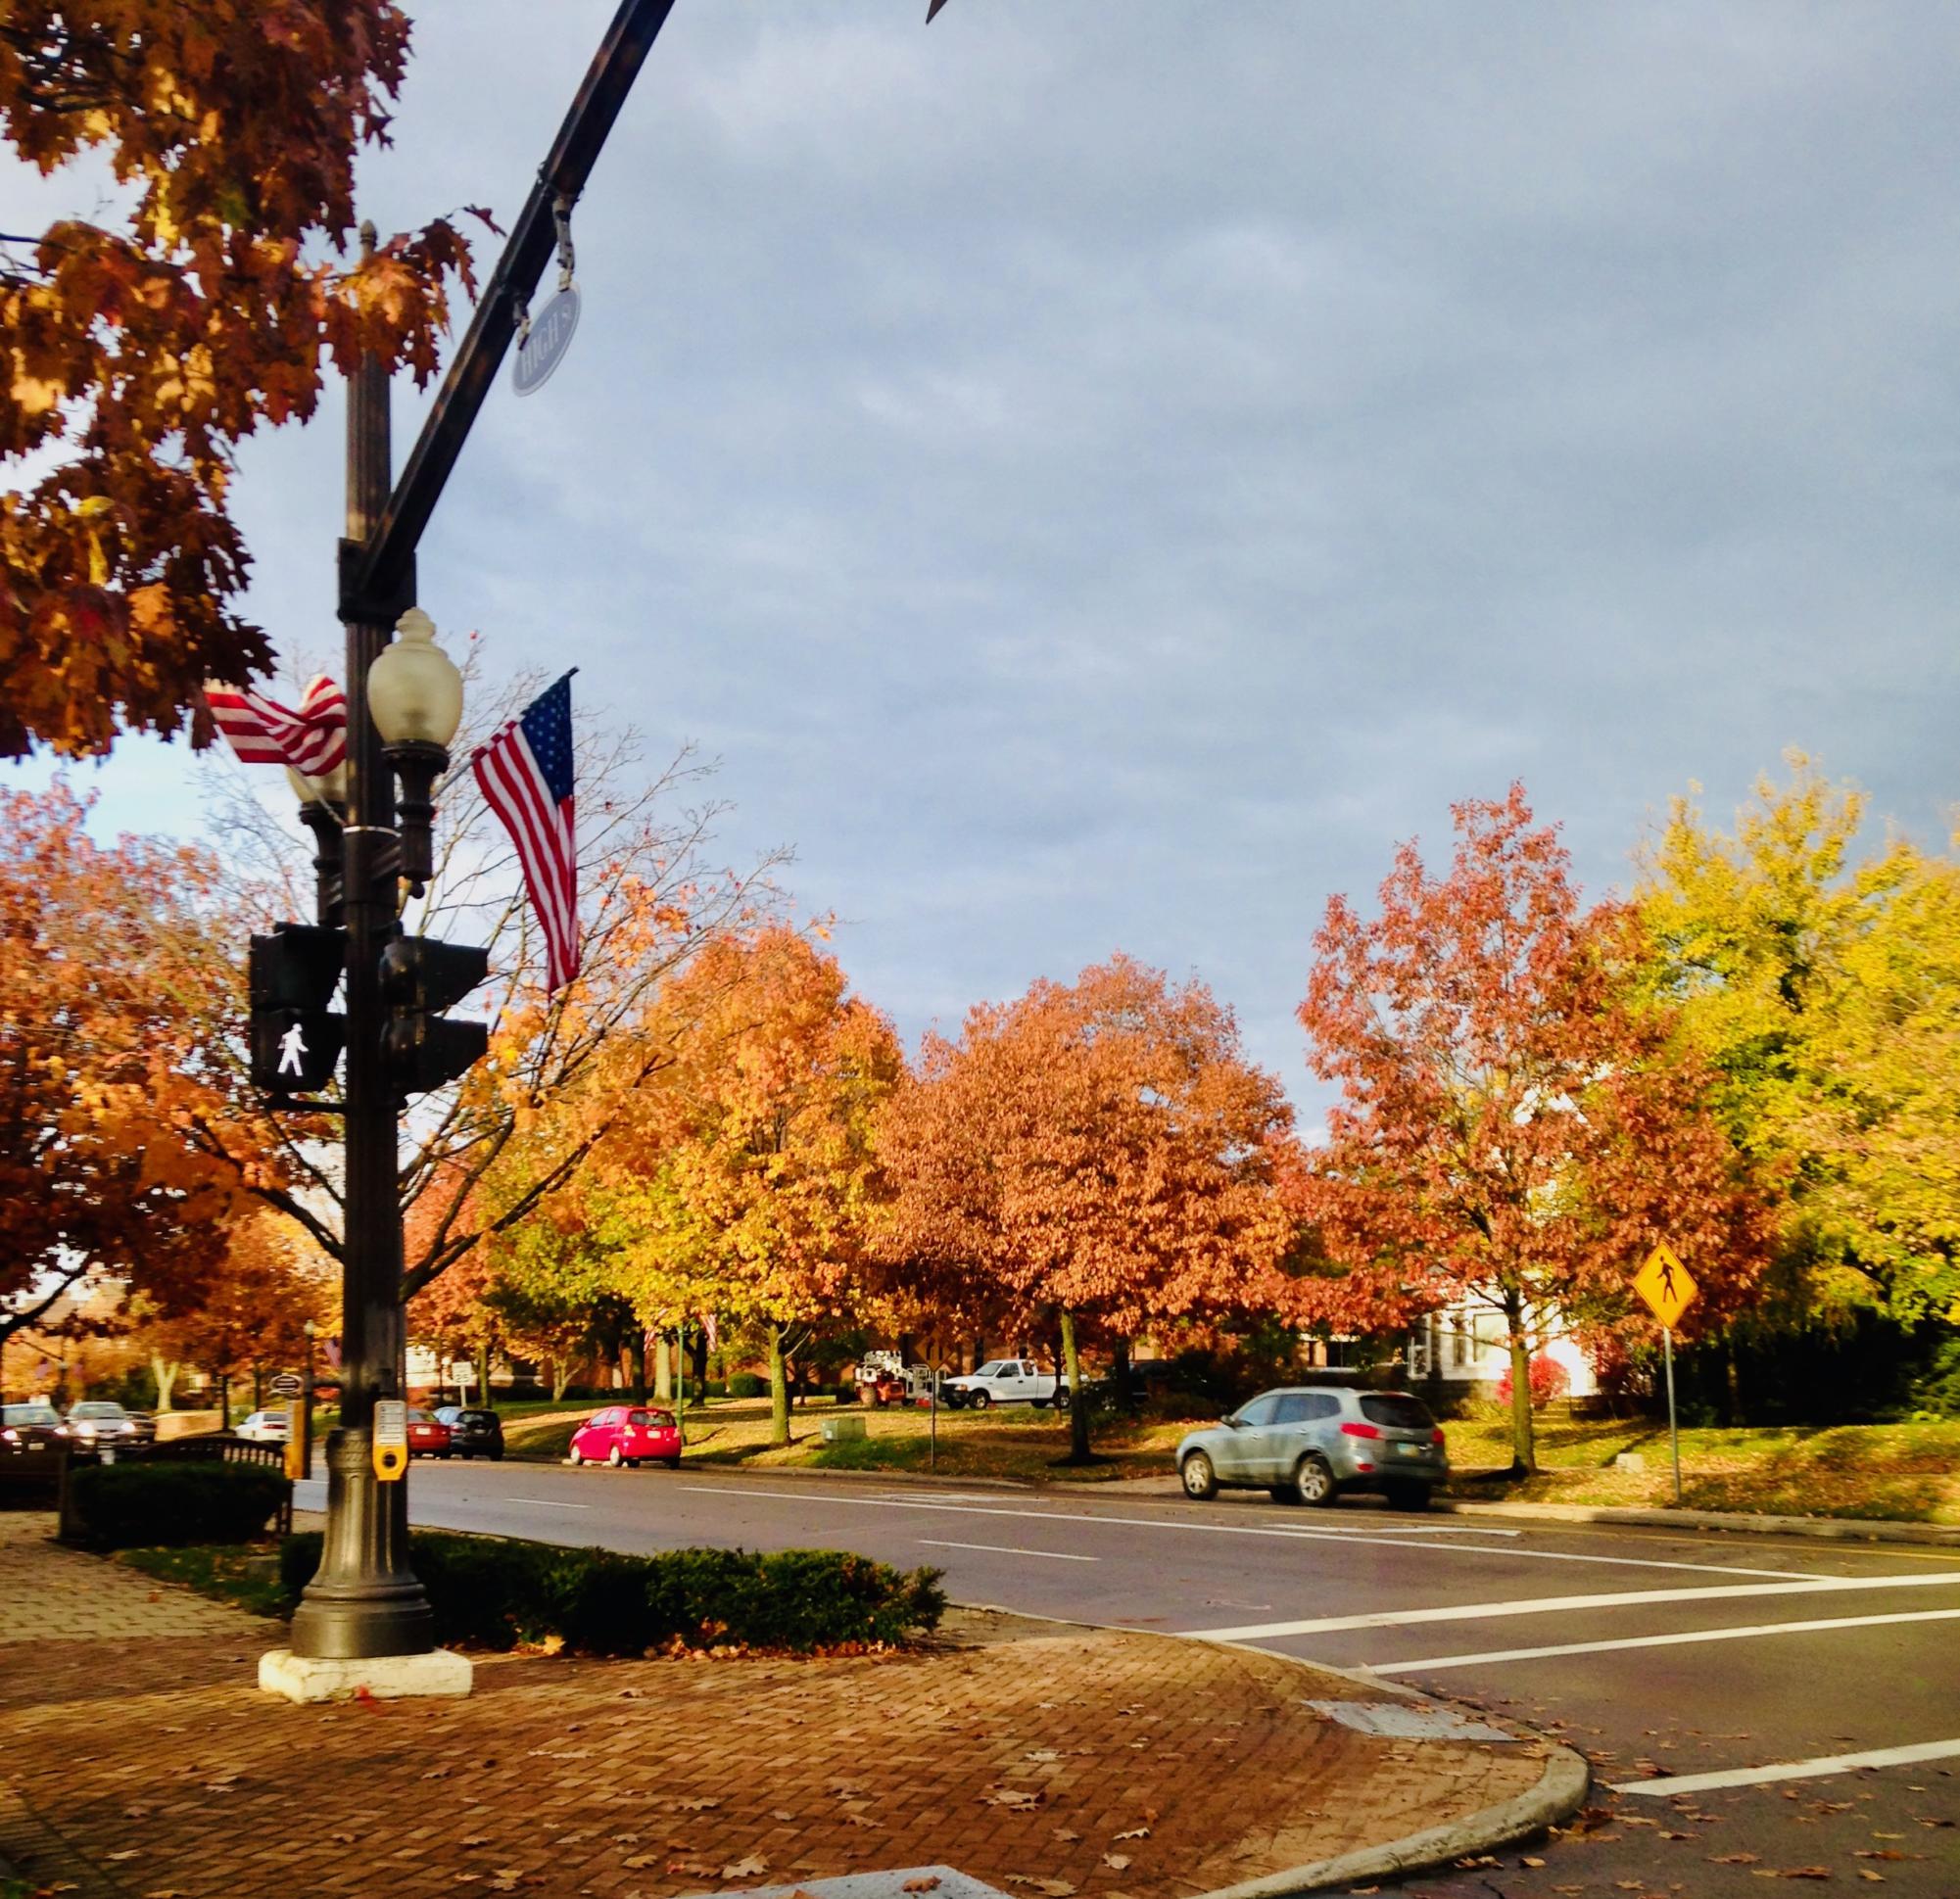 The maple trees that line high street in Old Worthington show off their bright fall colors